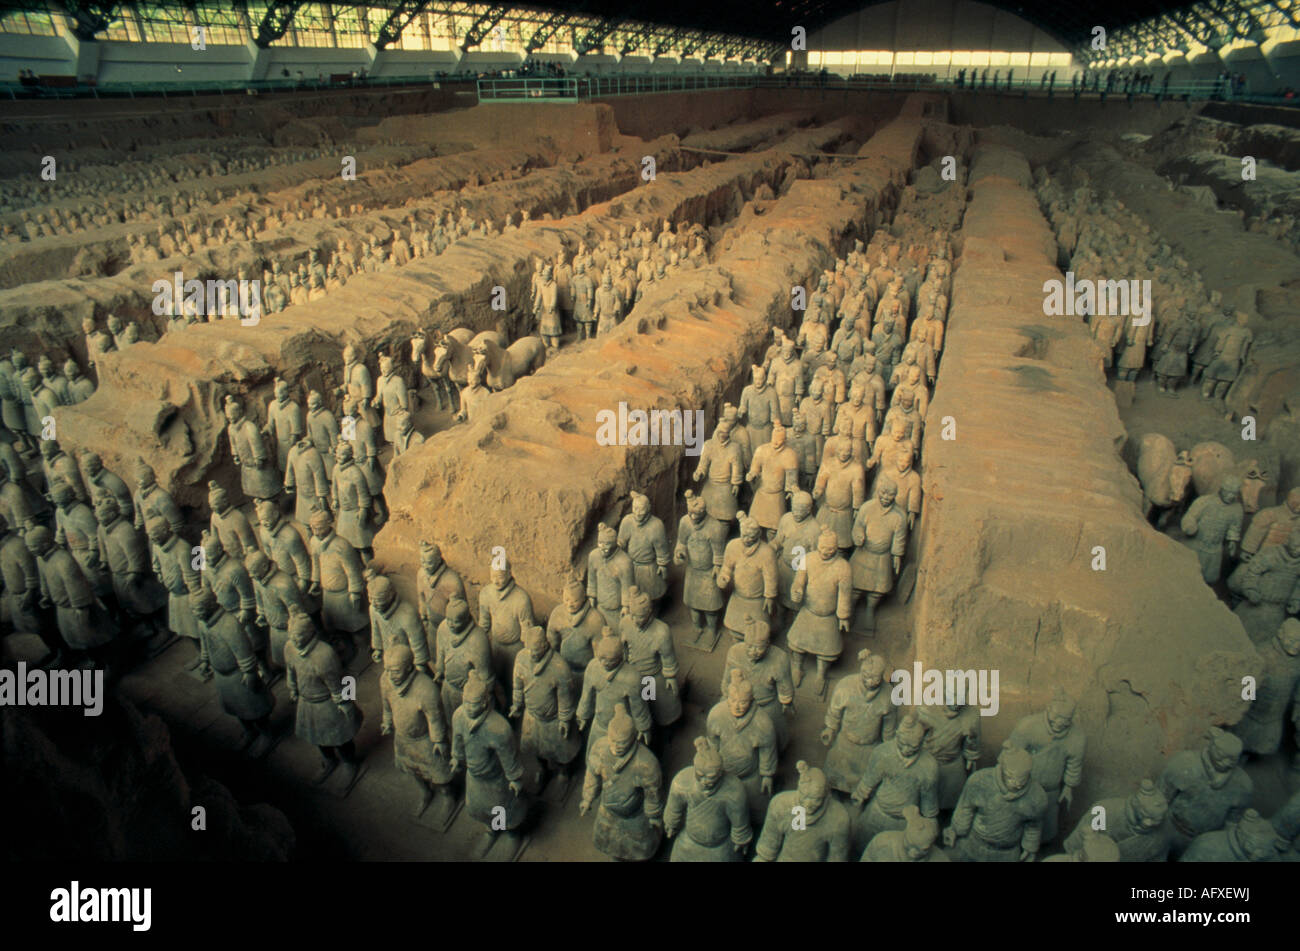 Terra-cotta Warriors and Horses of Emperor Qin Shihuang in Xi'an Shaanxi Province of China Stock Photo